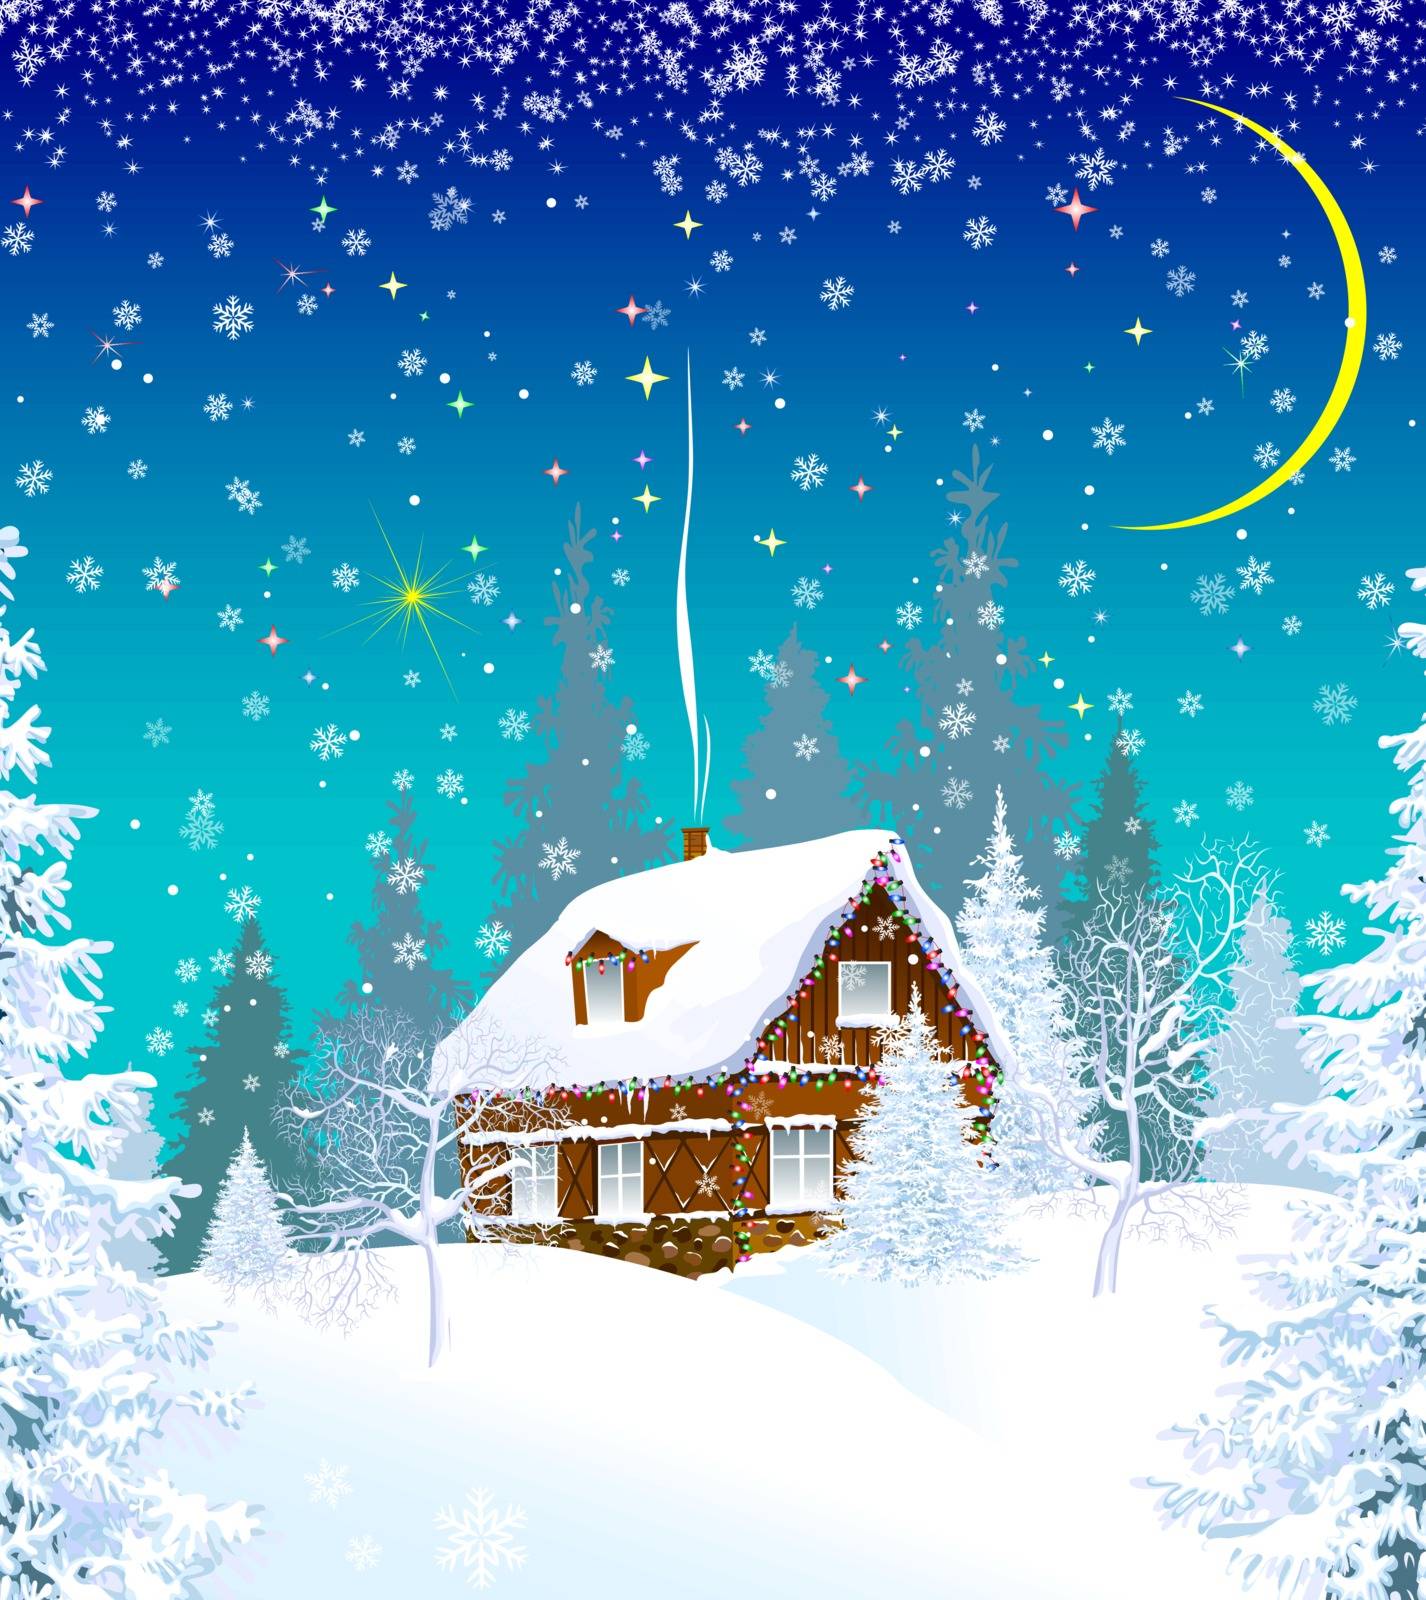 House in a snowy forest, decorated with a garland. Winter Christmas night. Christmas star in the sky.